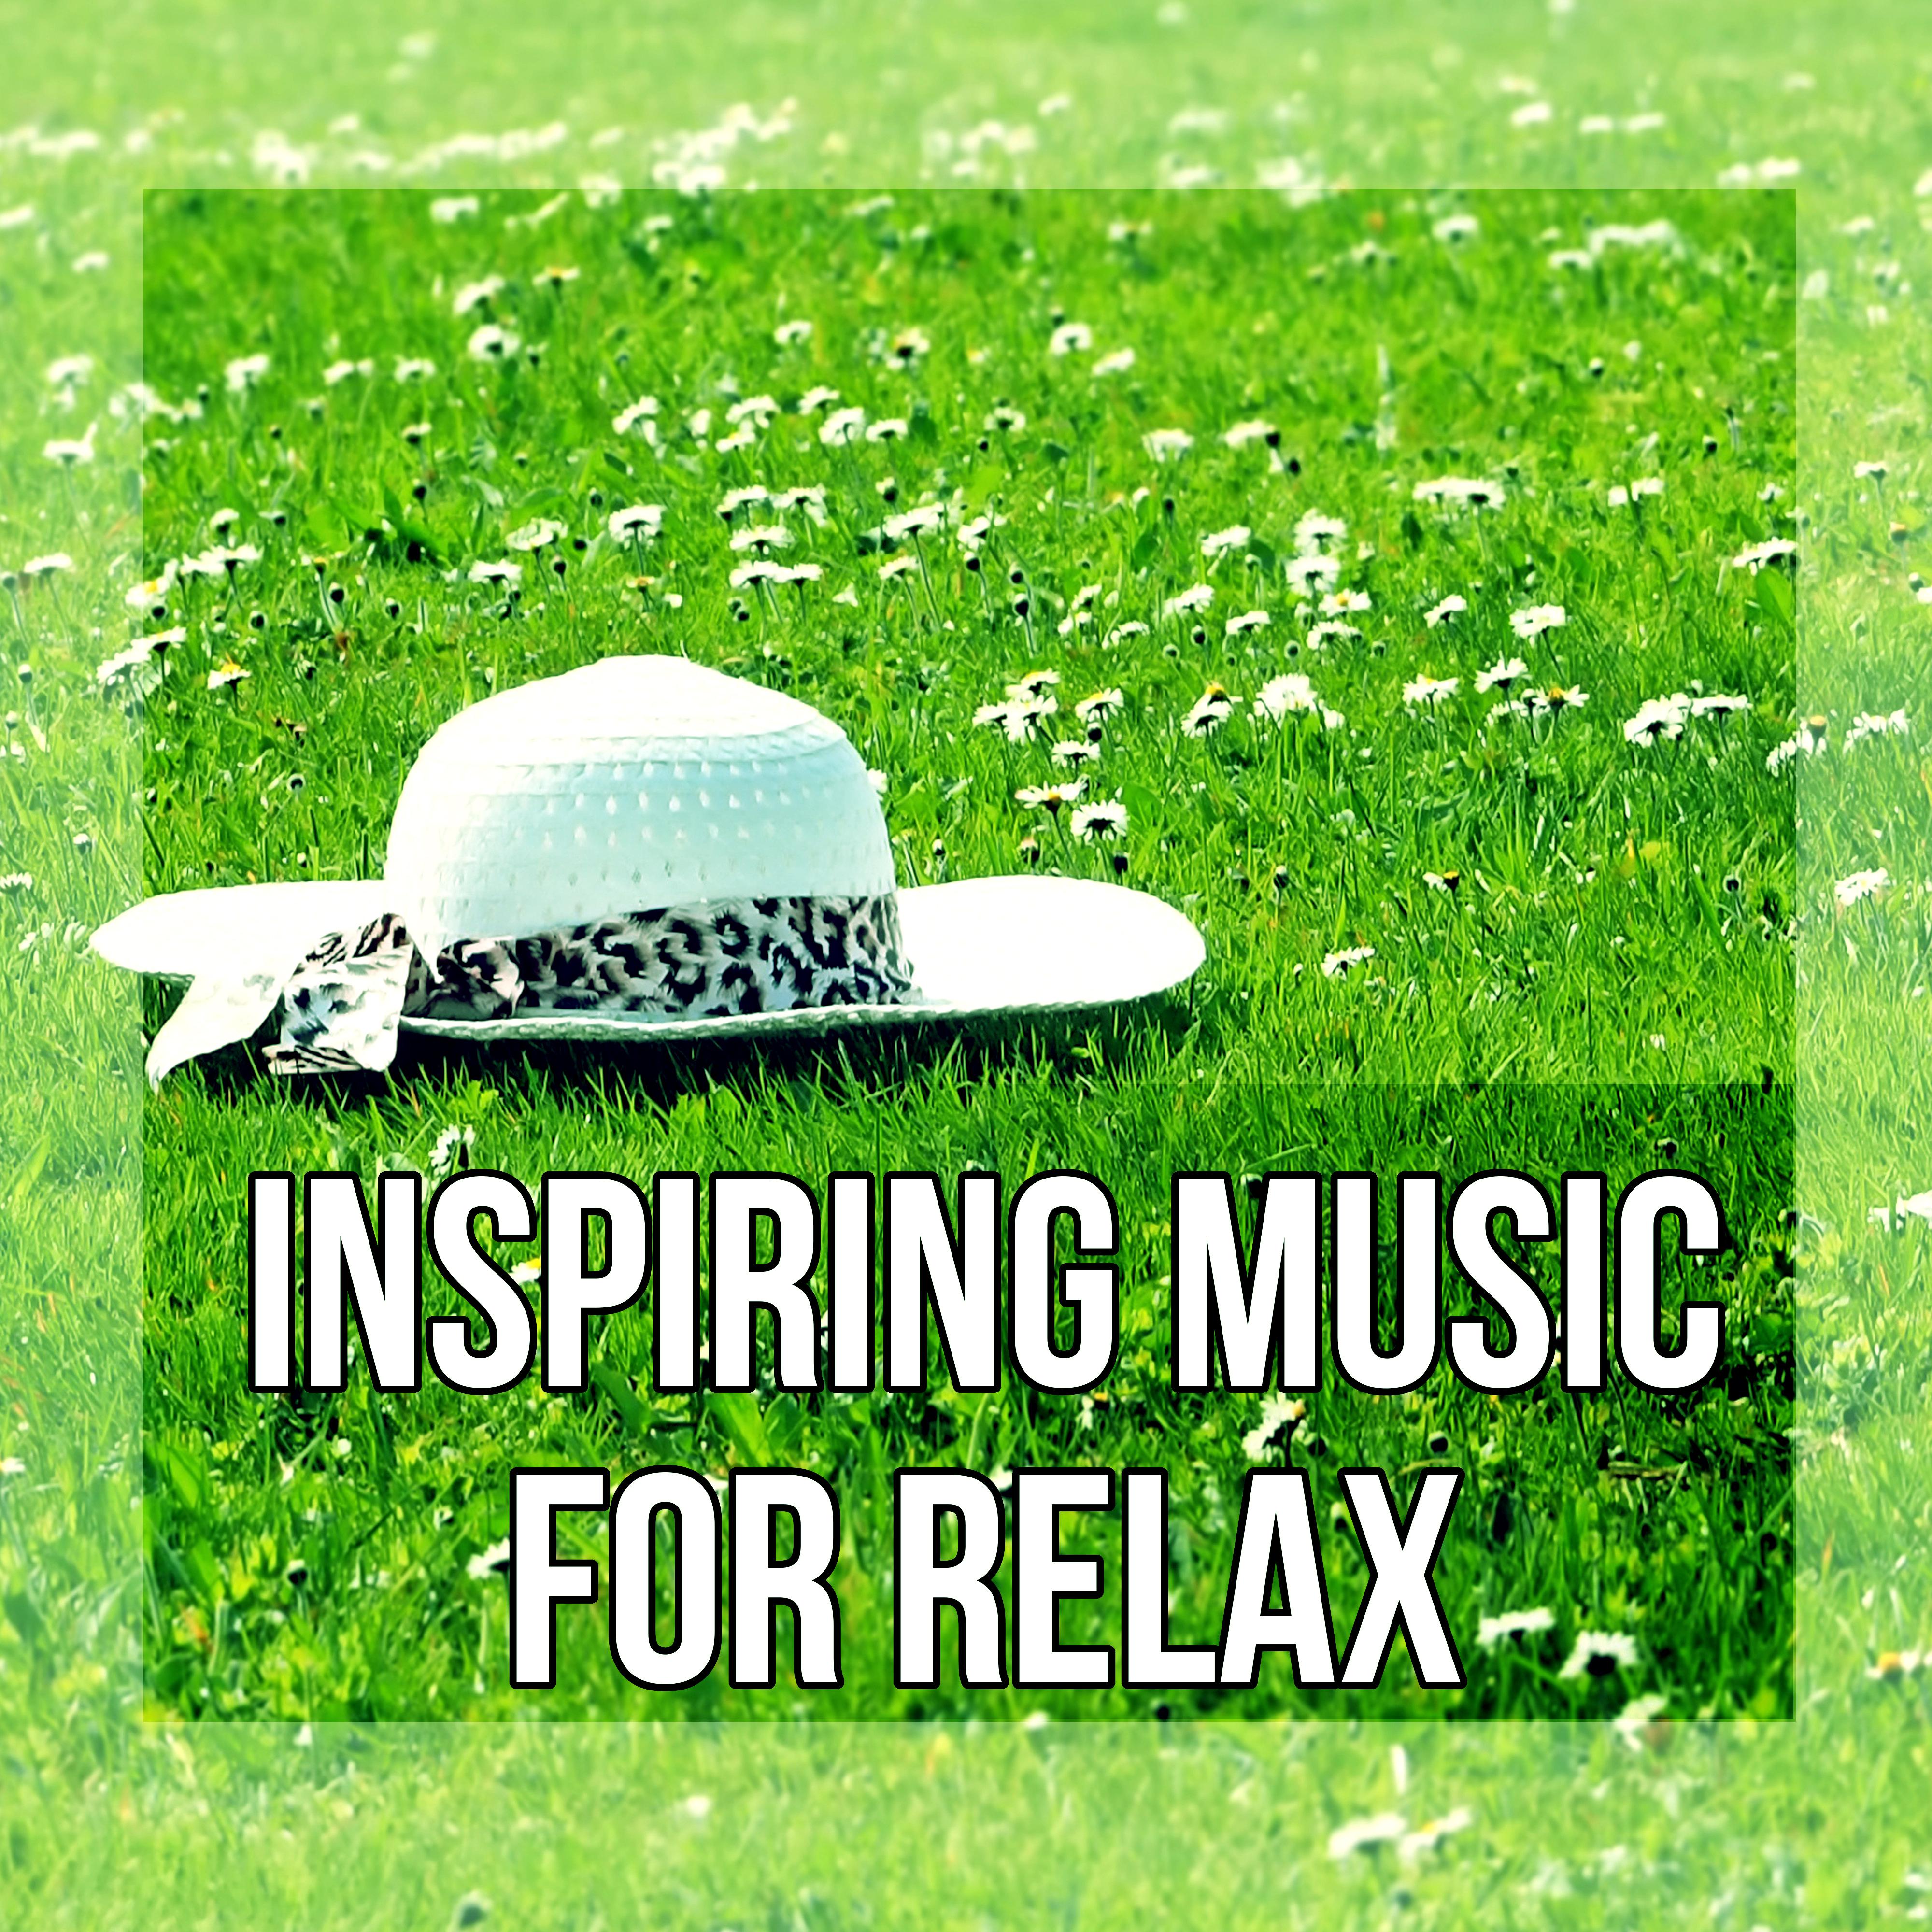 Inspiring Music for Relax - Nature Sounds, Calm Music for Relaxation, Inner Peace, Stress Relief, Deep Melody for Relax